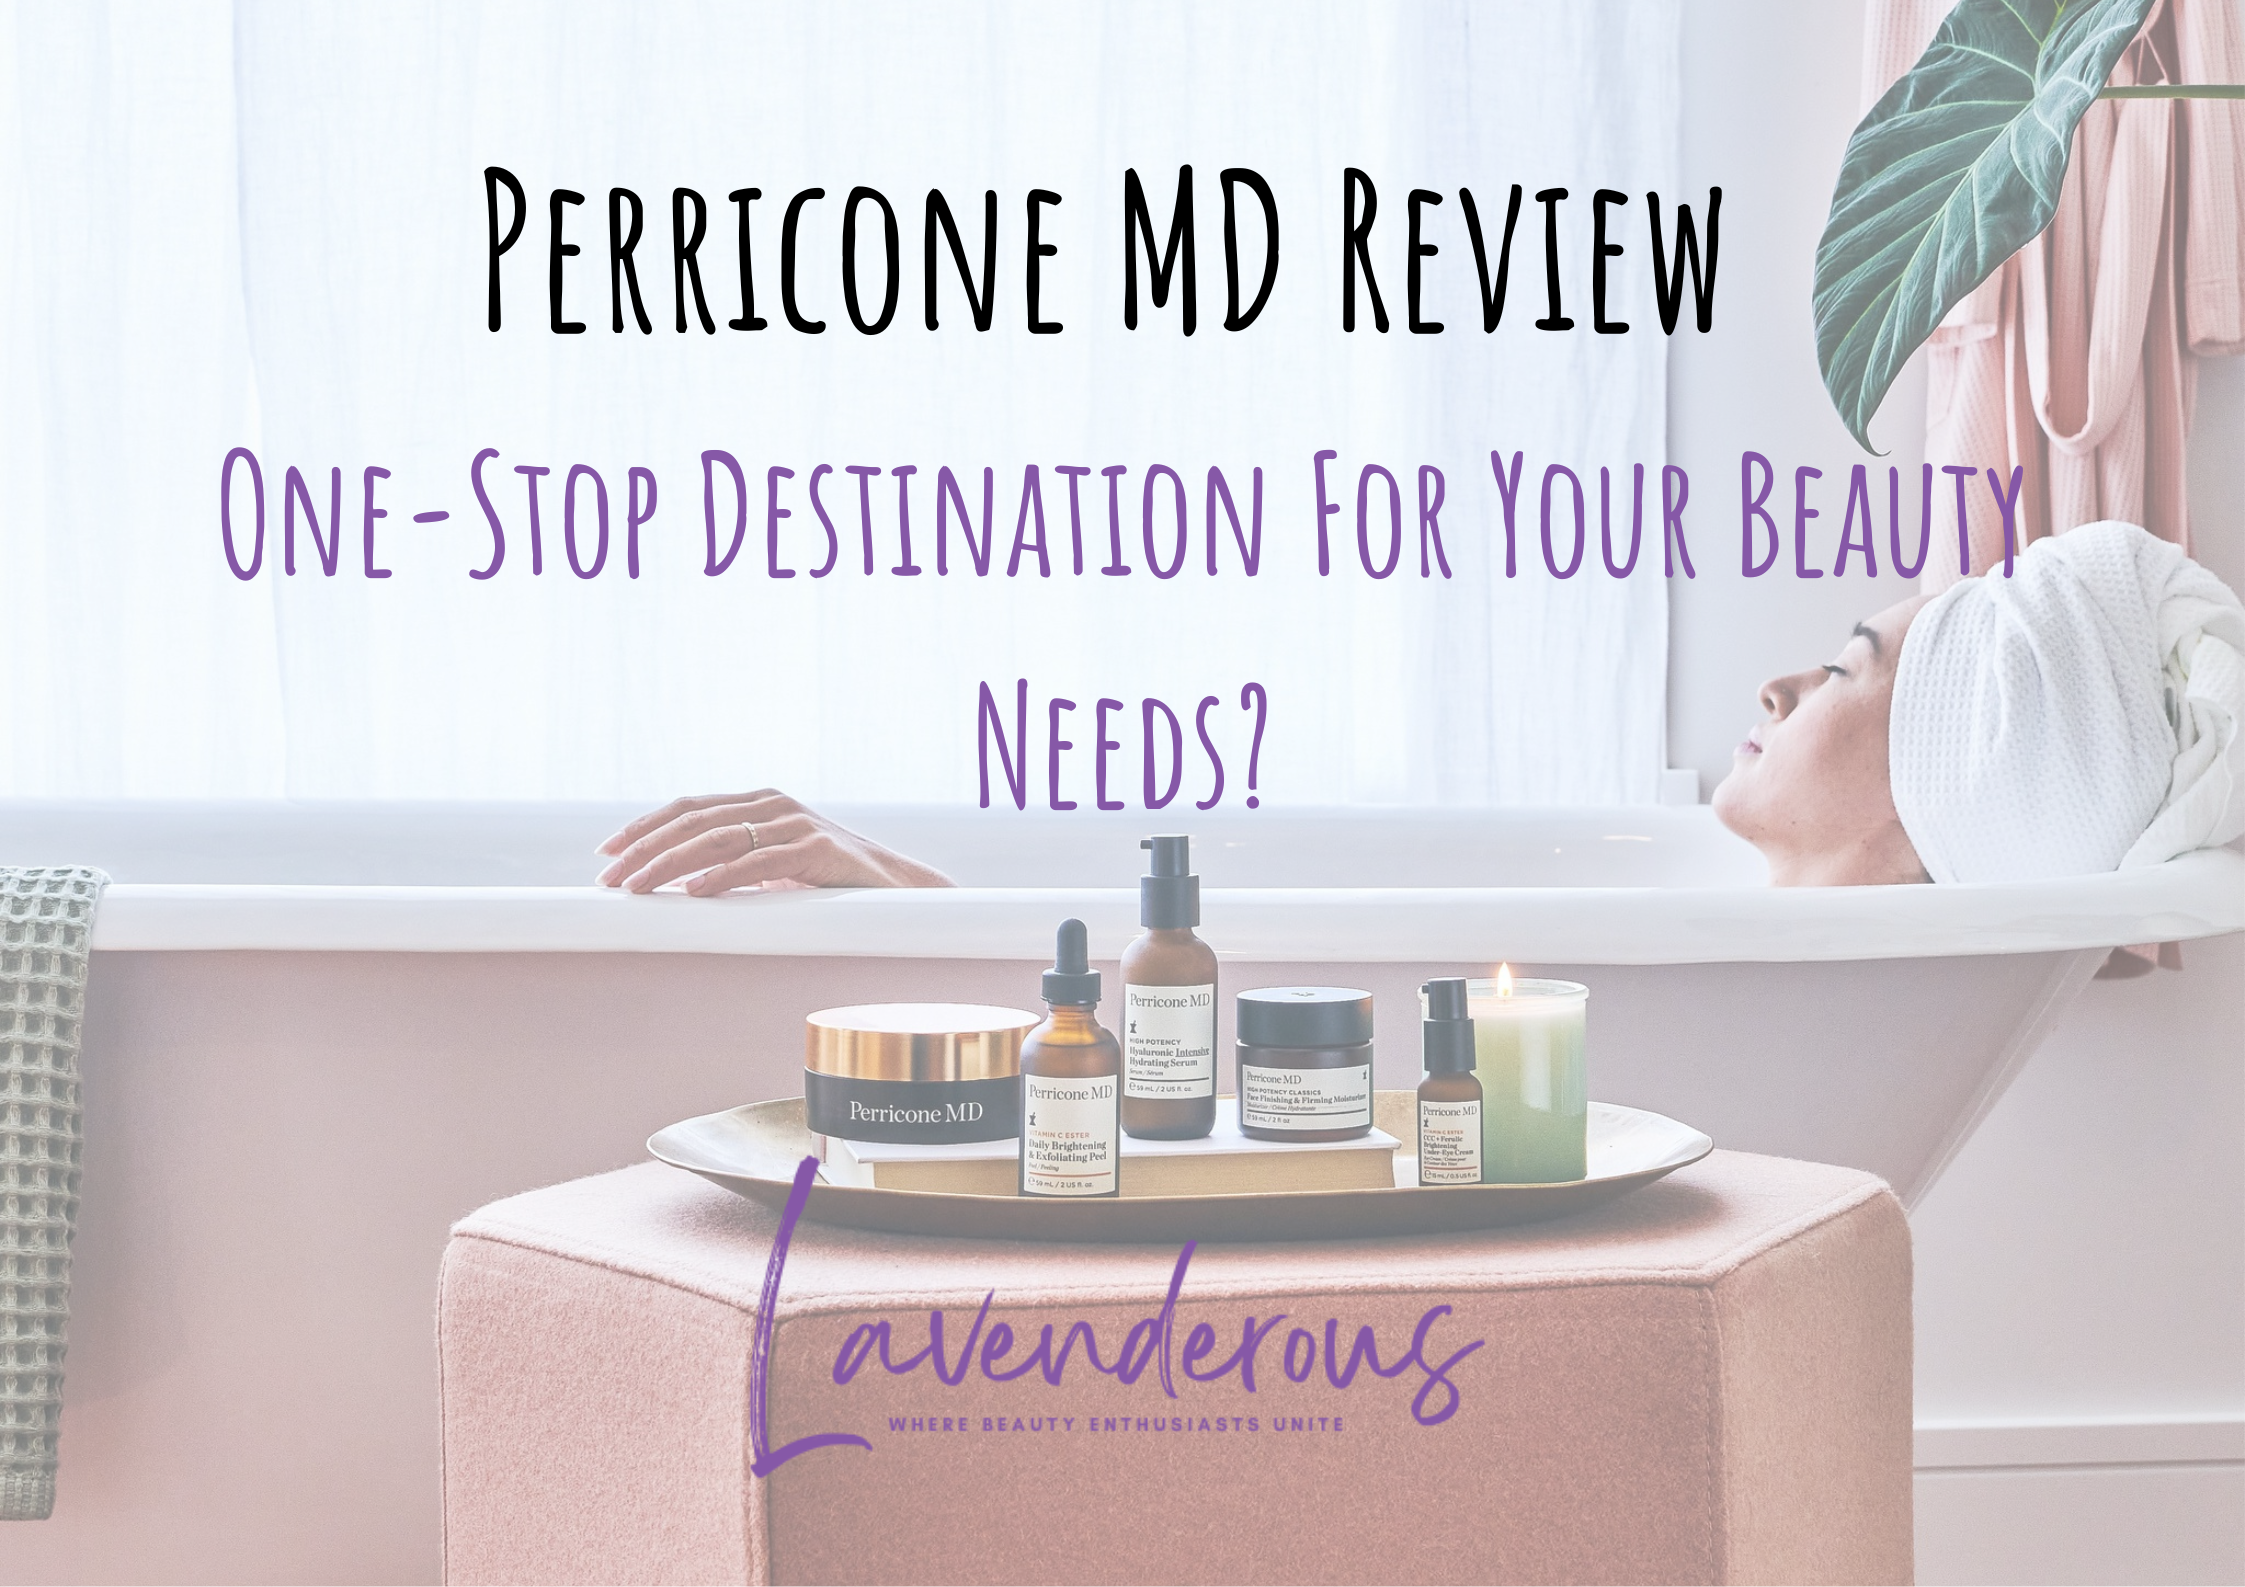 Perricone MD Reviews